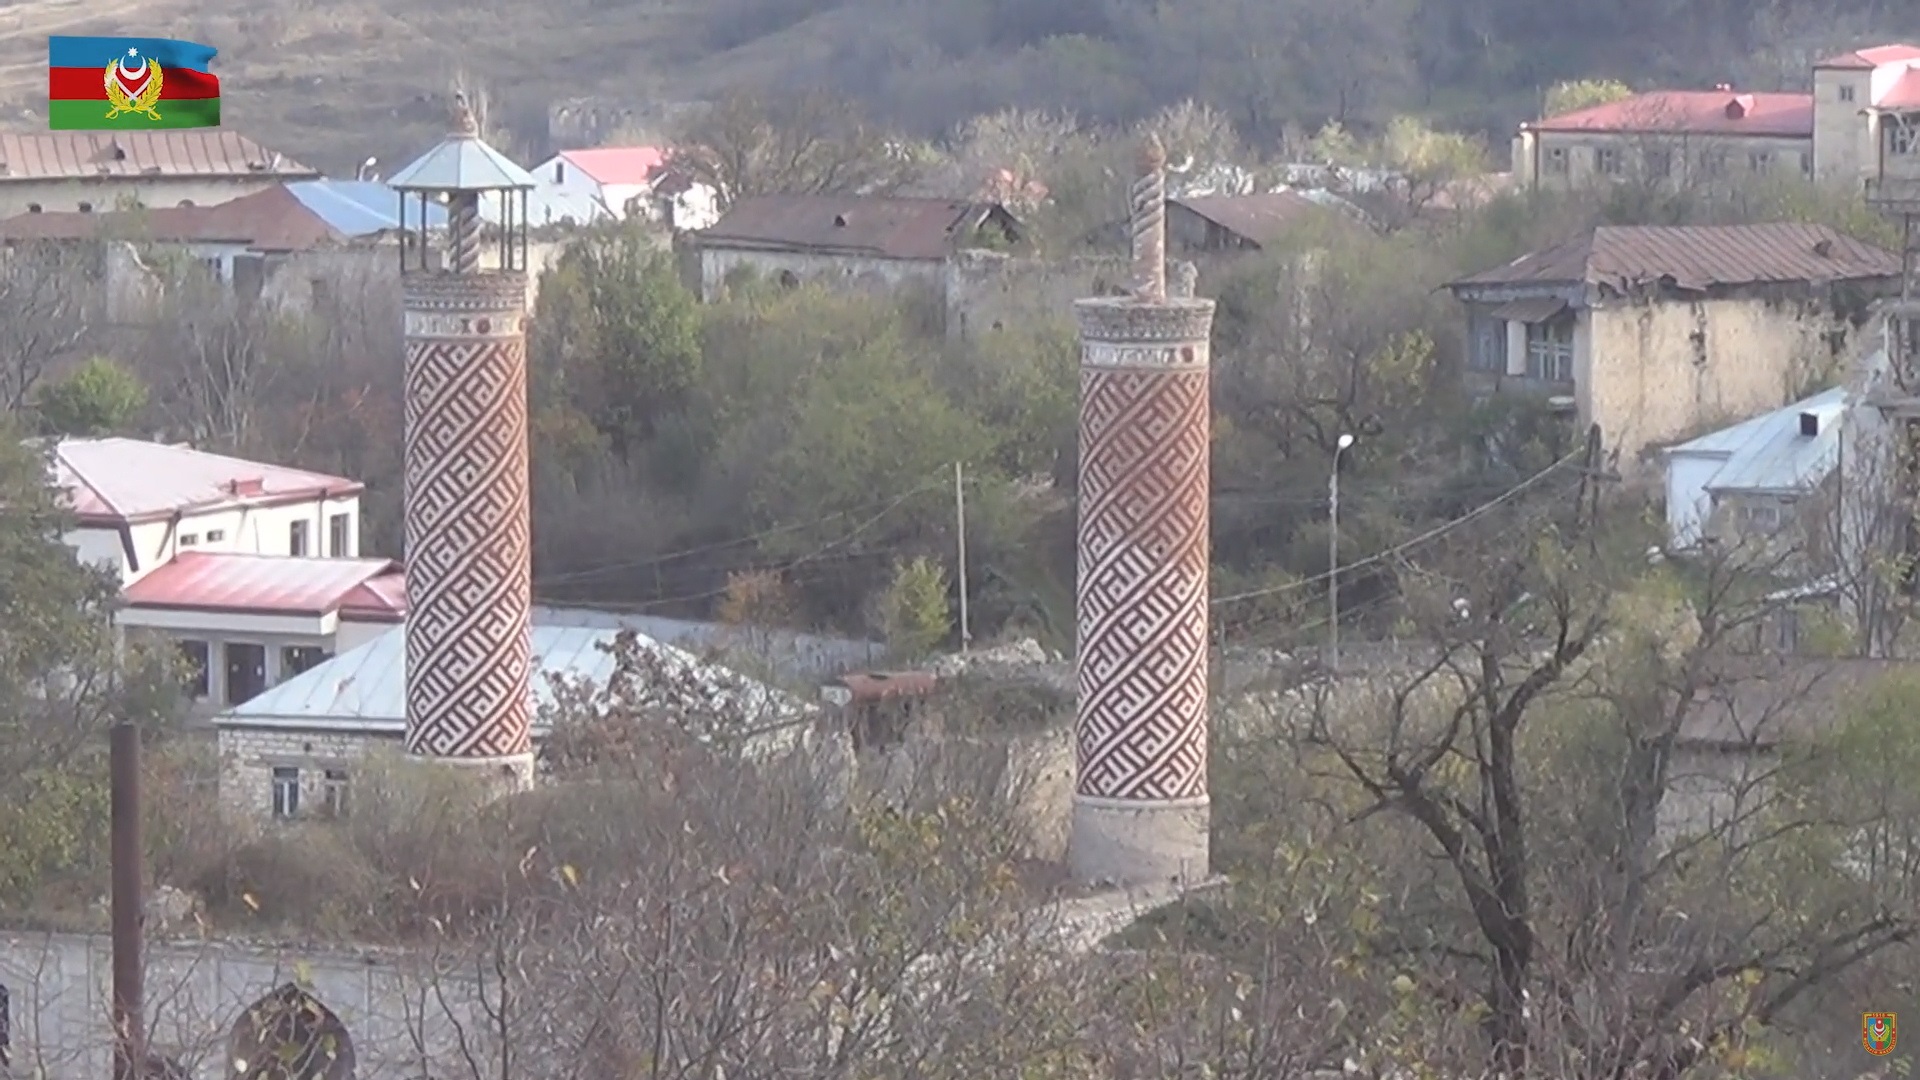 epa08809704 A still image taken from a handout video footage made available on 09 November 2020 on the official website of the Azerbaijan's Defence Ministry shows view of the town of Shushi (another spelling Shusha) after the Azerbaijani Army took the town under its control, in Nagorno-Karabakh. Armed clashes erupted on 27 September 2020 in the simmering territorial conflict between Azerbaijan and Armenia over the Nagorno-Karabakh territory along the contact line of the self-proclaimed Nagorno-Karabakh Republic (also known as Artsakh).  EPA/AZERBAIJAN DEFENCE MINISTRY / HANDOUT MANDATORY CREDIT / HANDOUT EDITORIAL USE ONLY/NO SALES